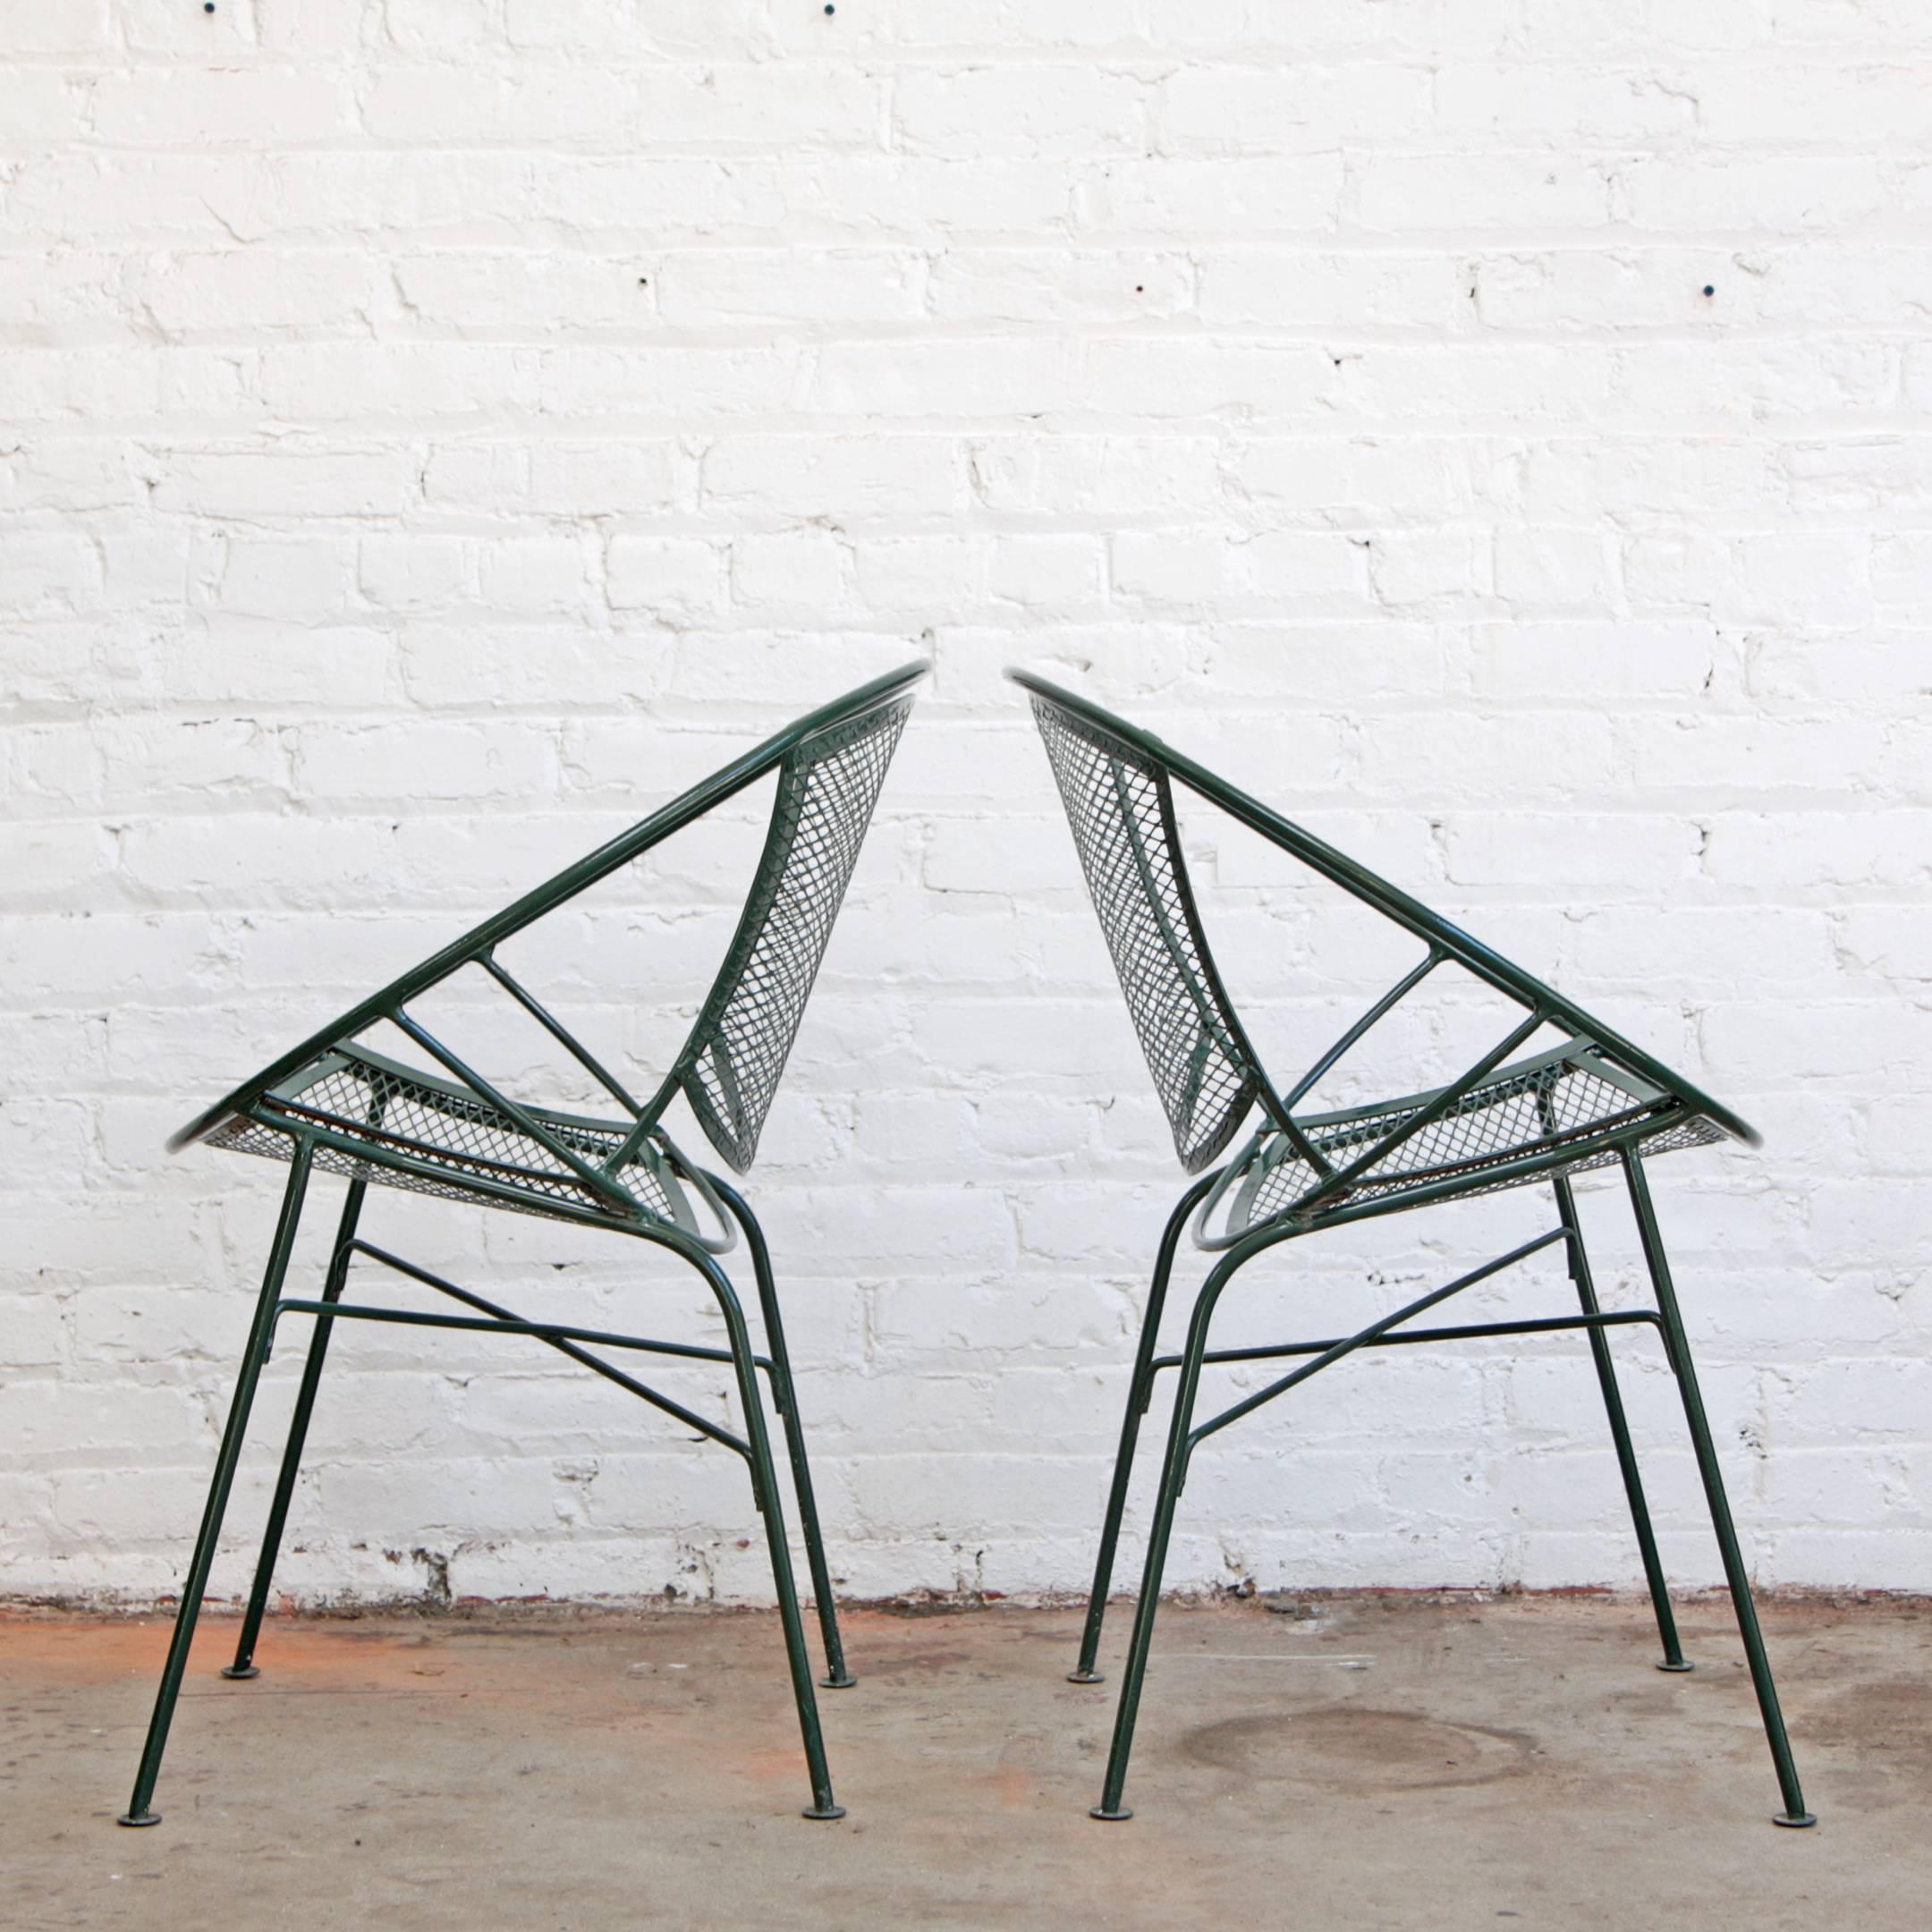 The radar chair or clamshell chair by Maurizio Tempestini for John Salterini. Minimalist design, wrought iron construction. These chairs were initially designed as outdoor / patio furniture but are comfortable and commonly used indoors as well.